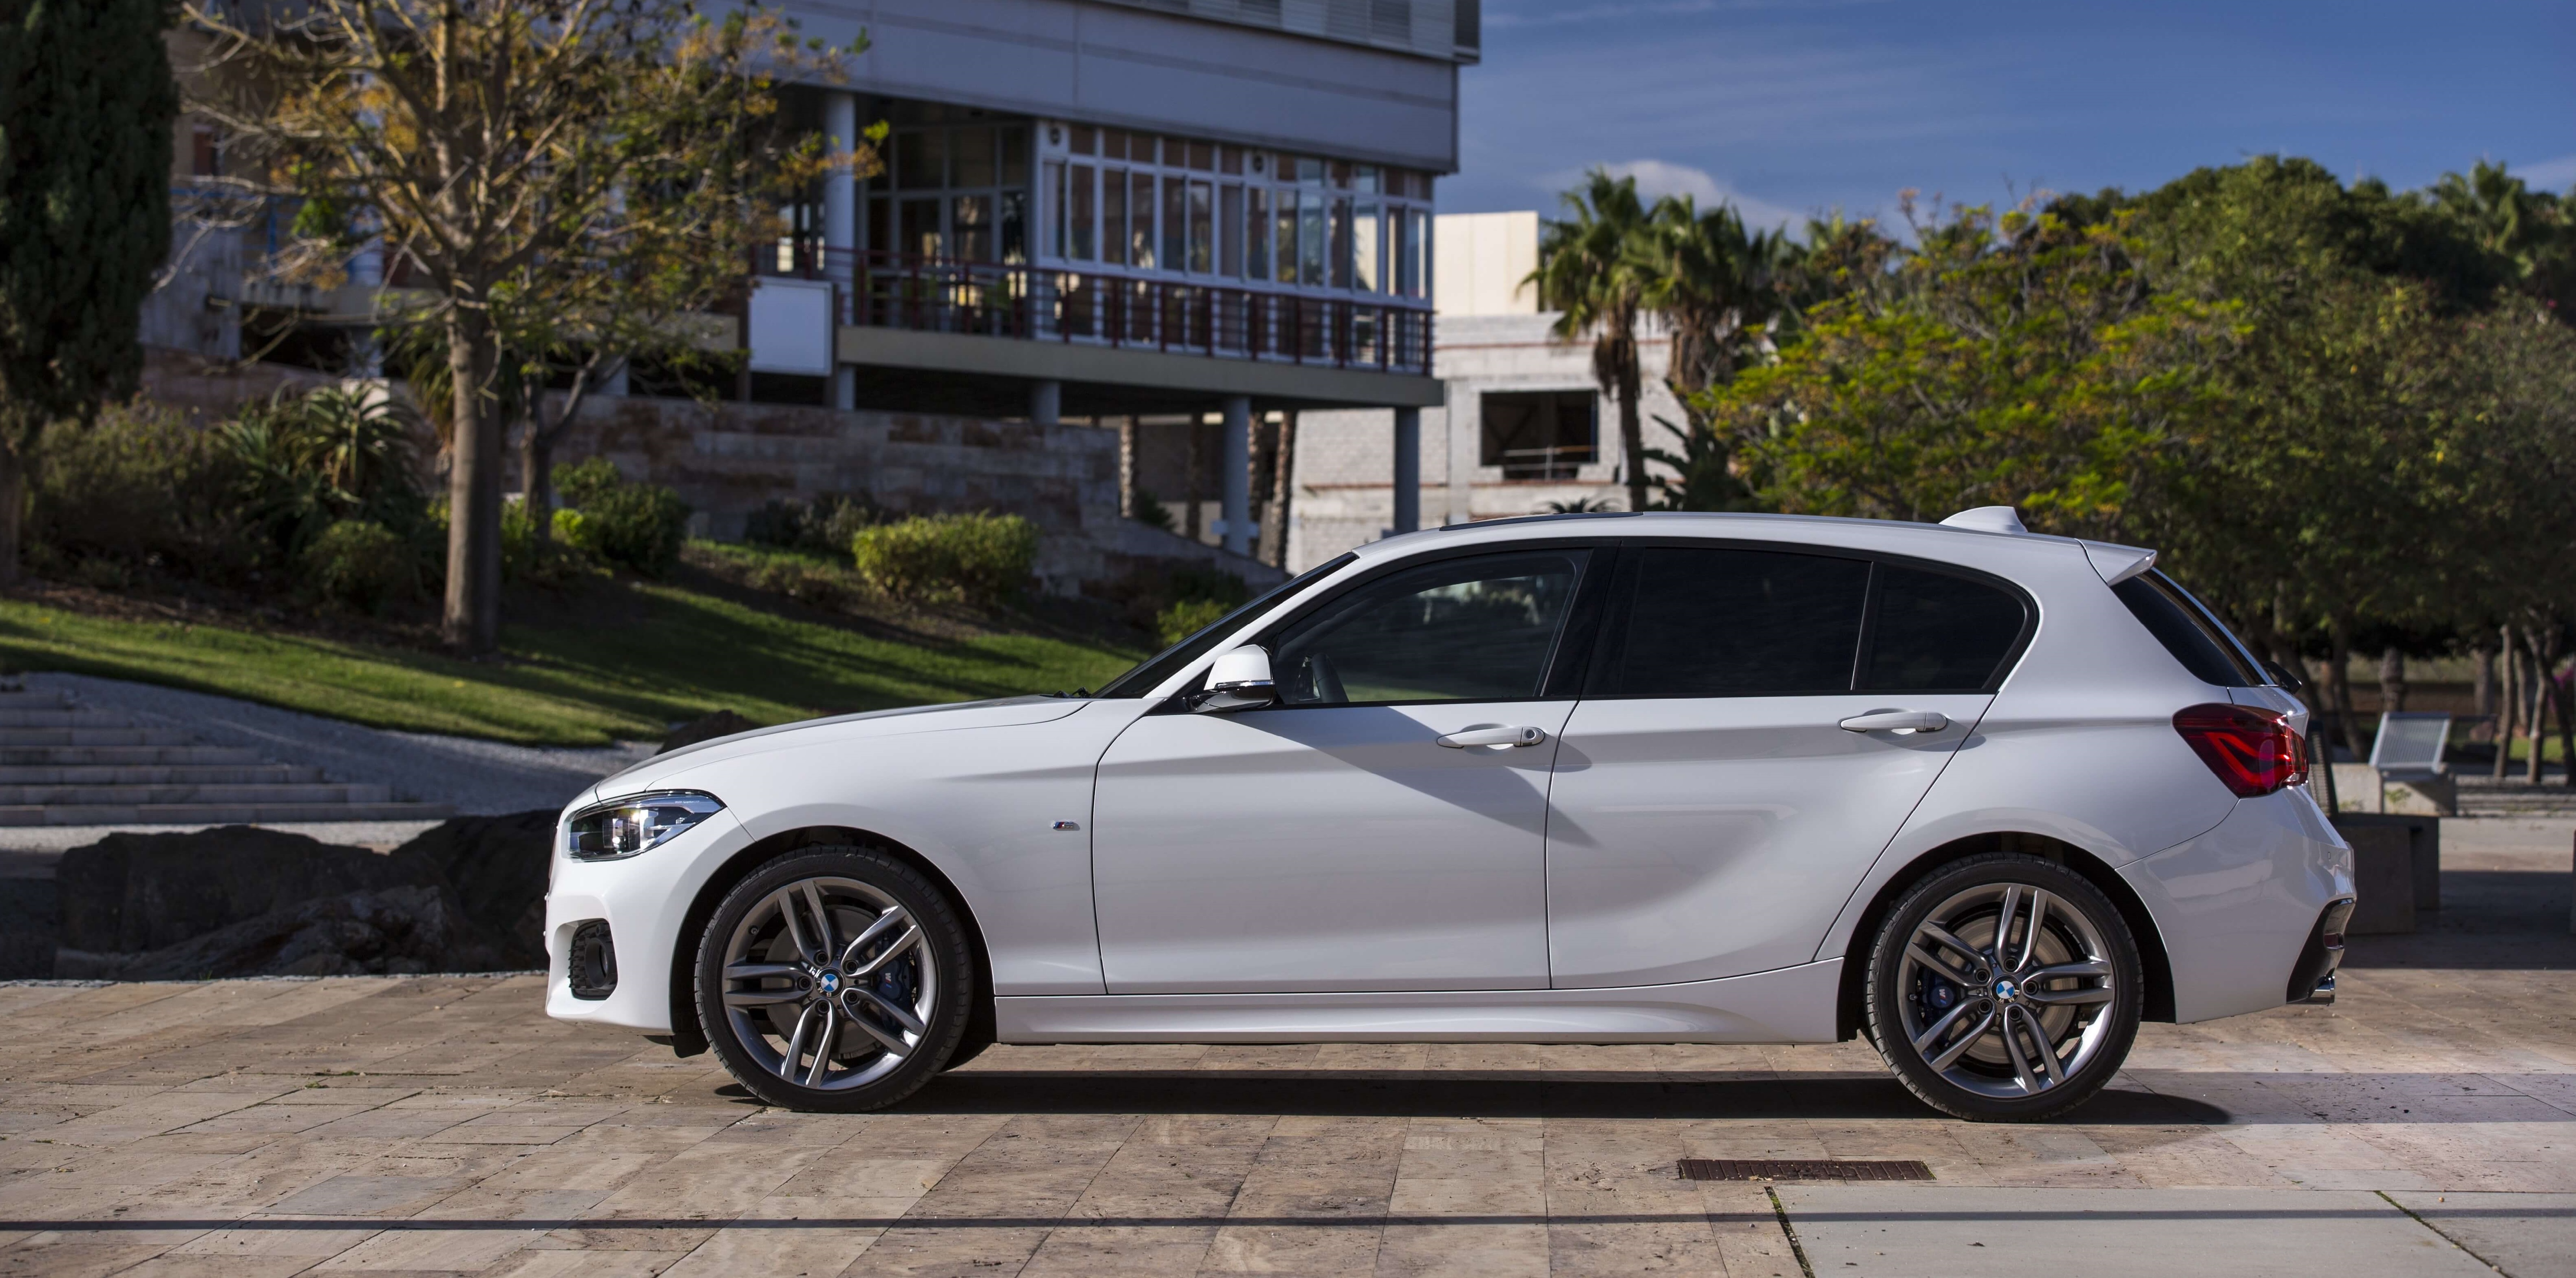 Review of the BMW 1 Series Hatchback Features / Price / Comparison